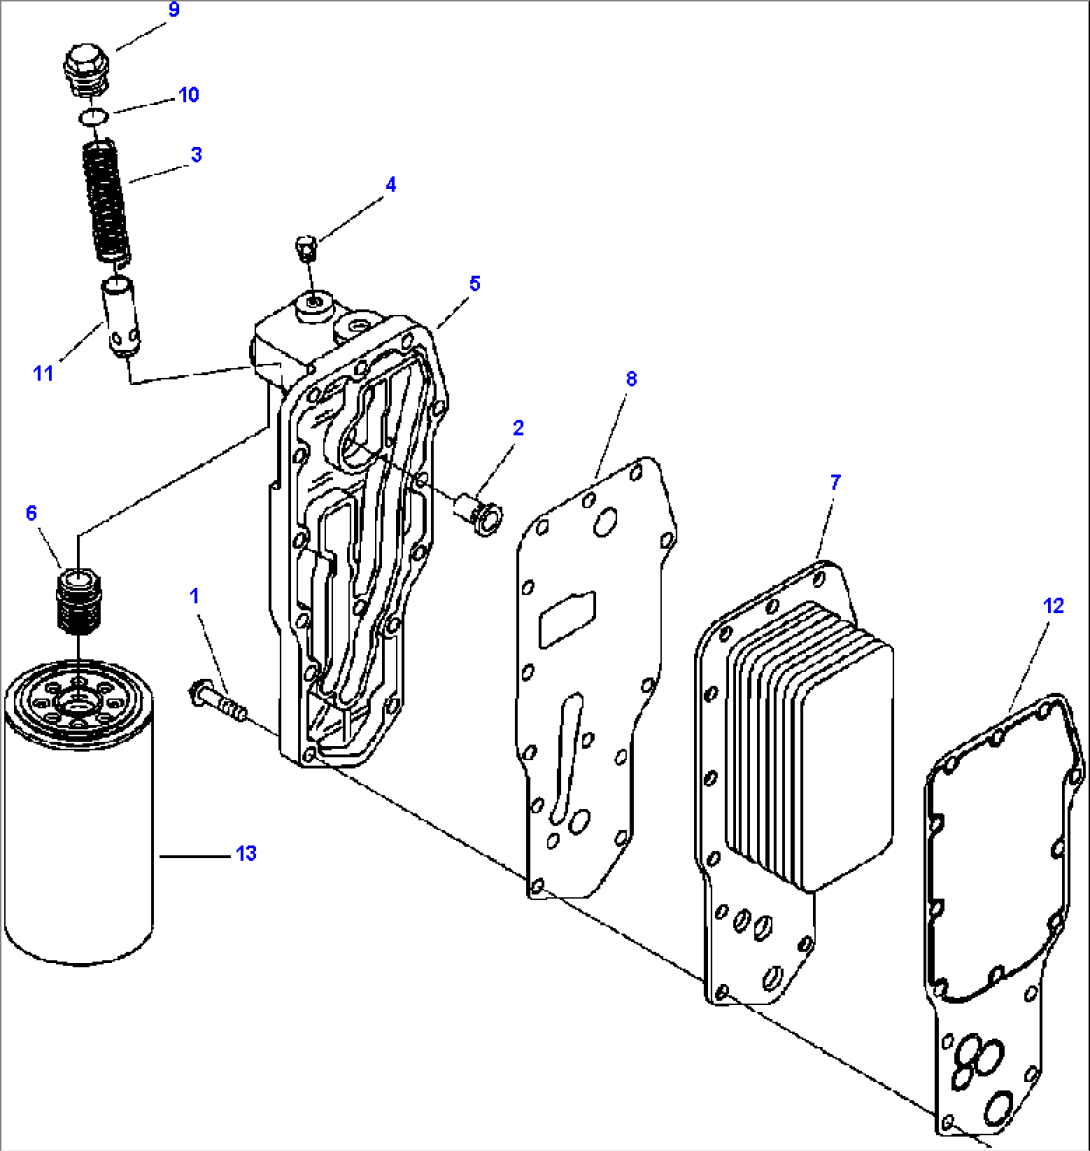 A3112-A1A2 LUBRICATING OIL COOLER